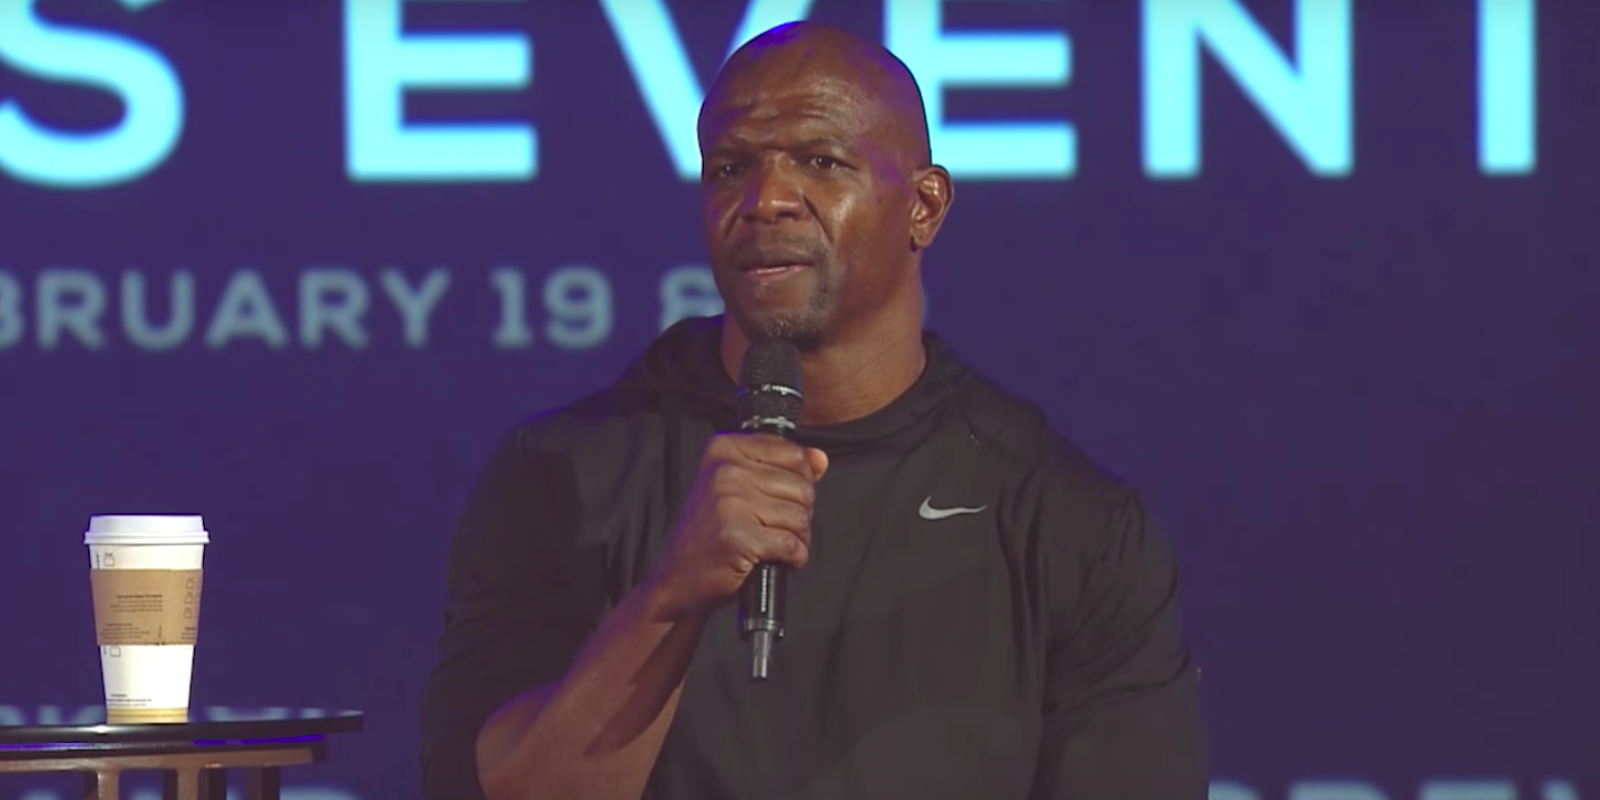 Terry Crews addresses his sexual assault experience in a series of 16 tweets.